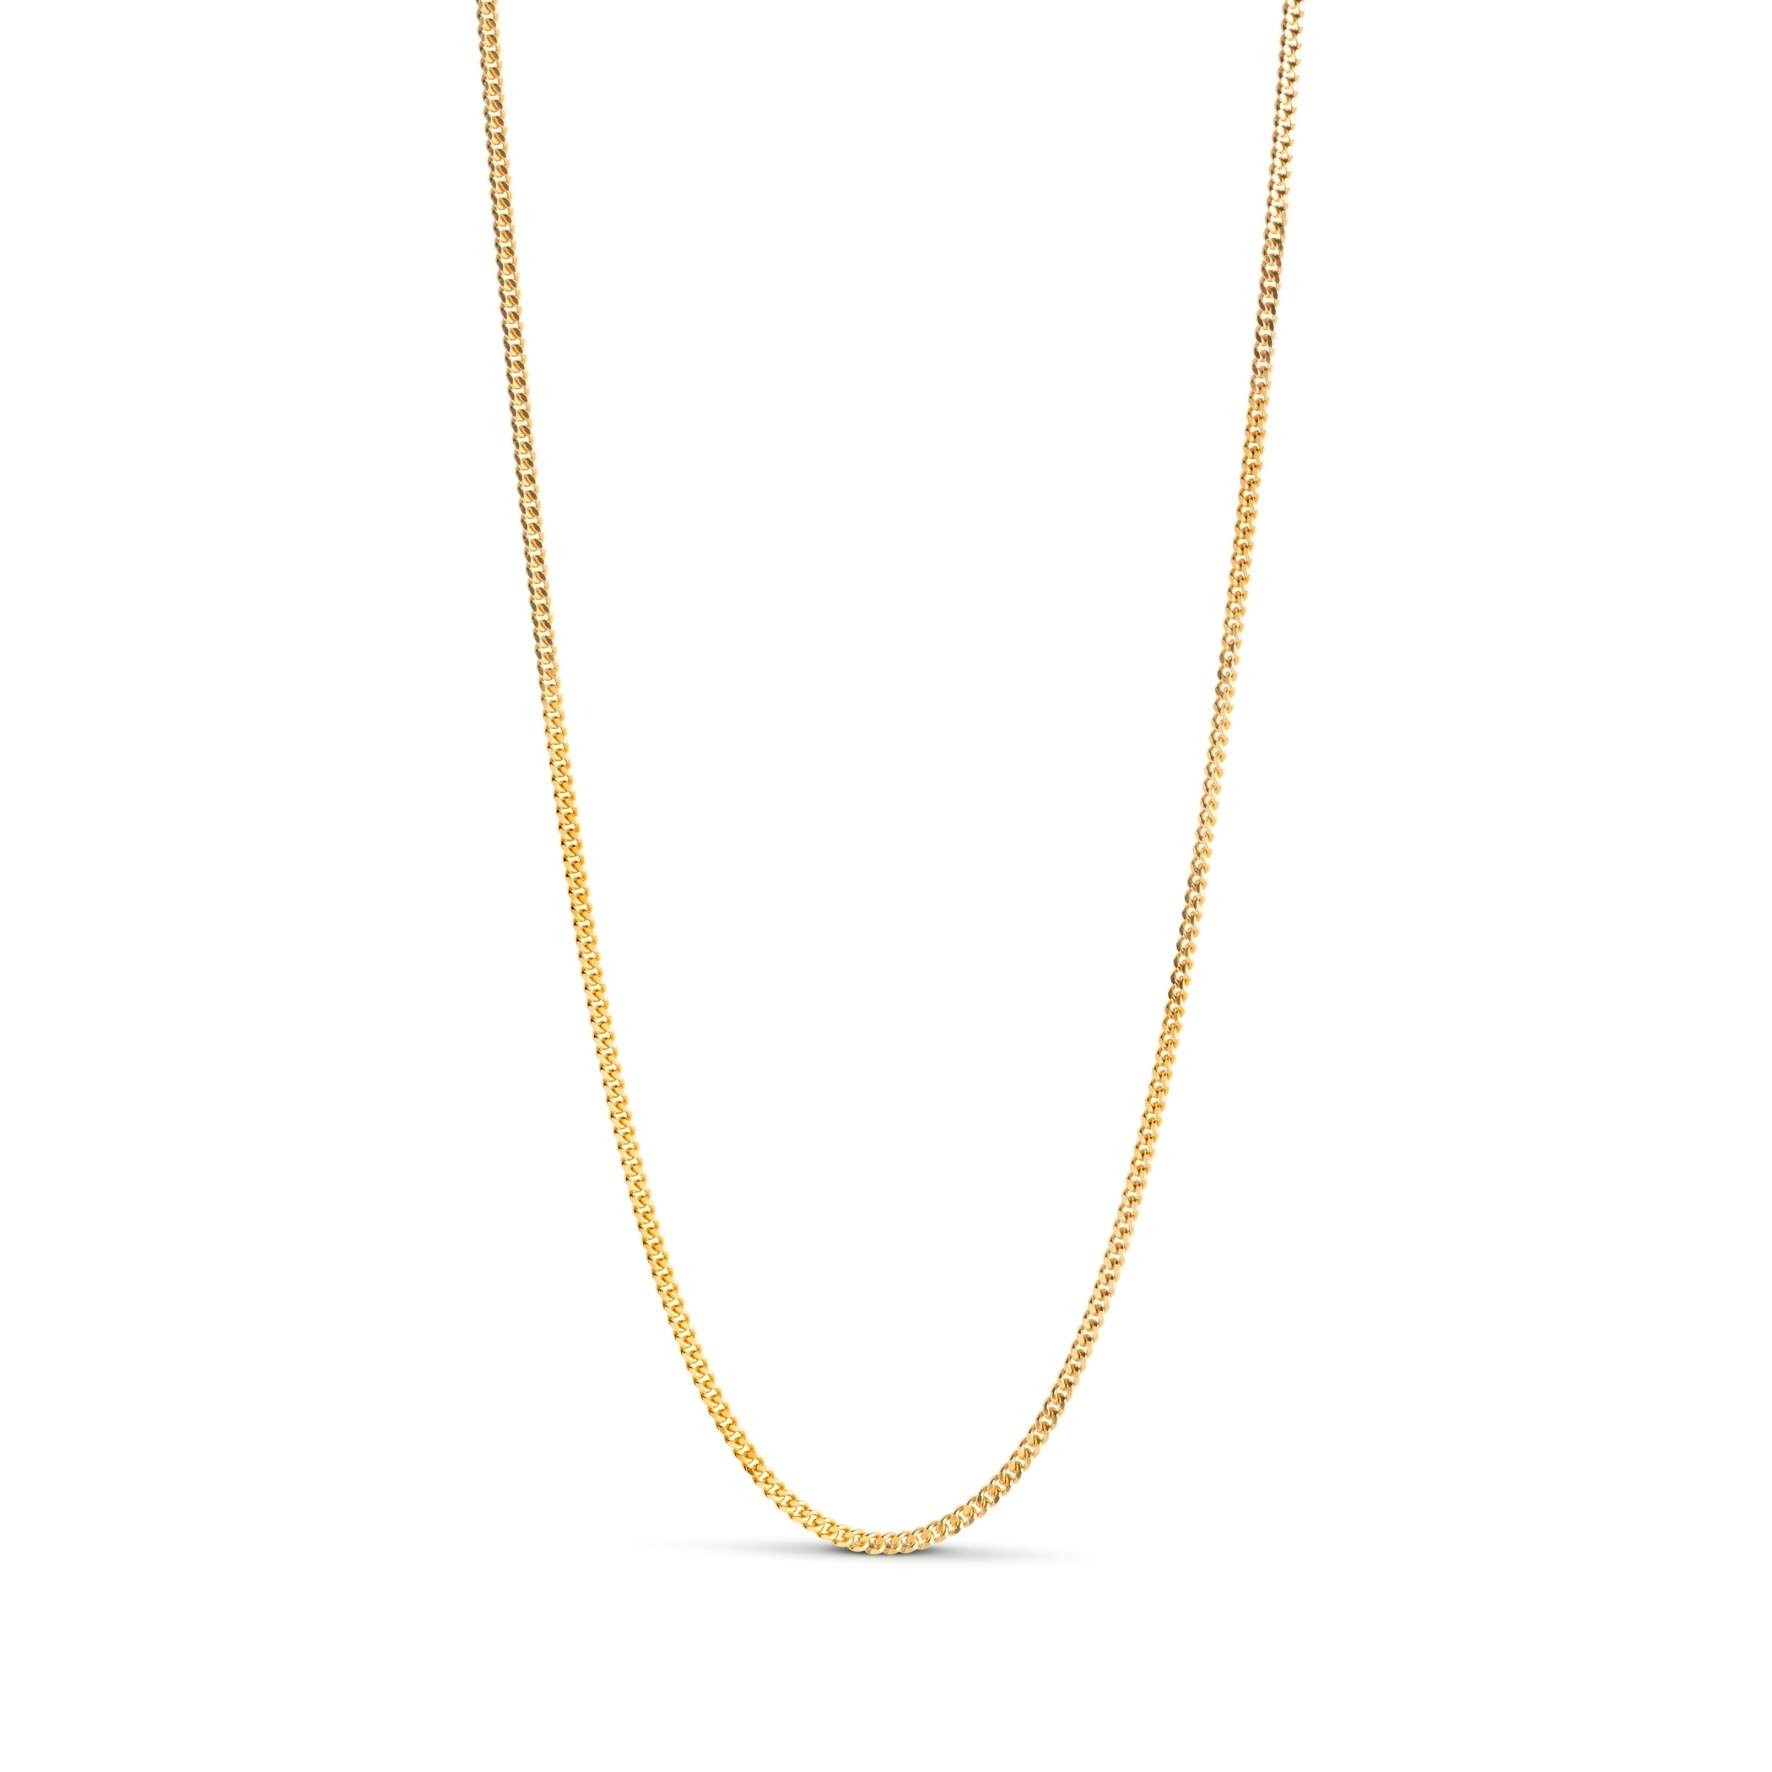 Curb Chain Necklace - 1,75 mm from Enamel Copenhagen in Goldplated-Silver Sterling 925